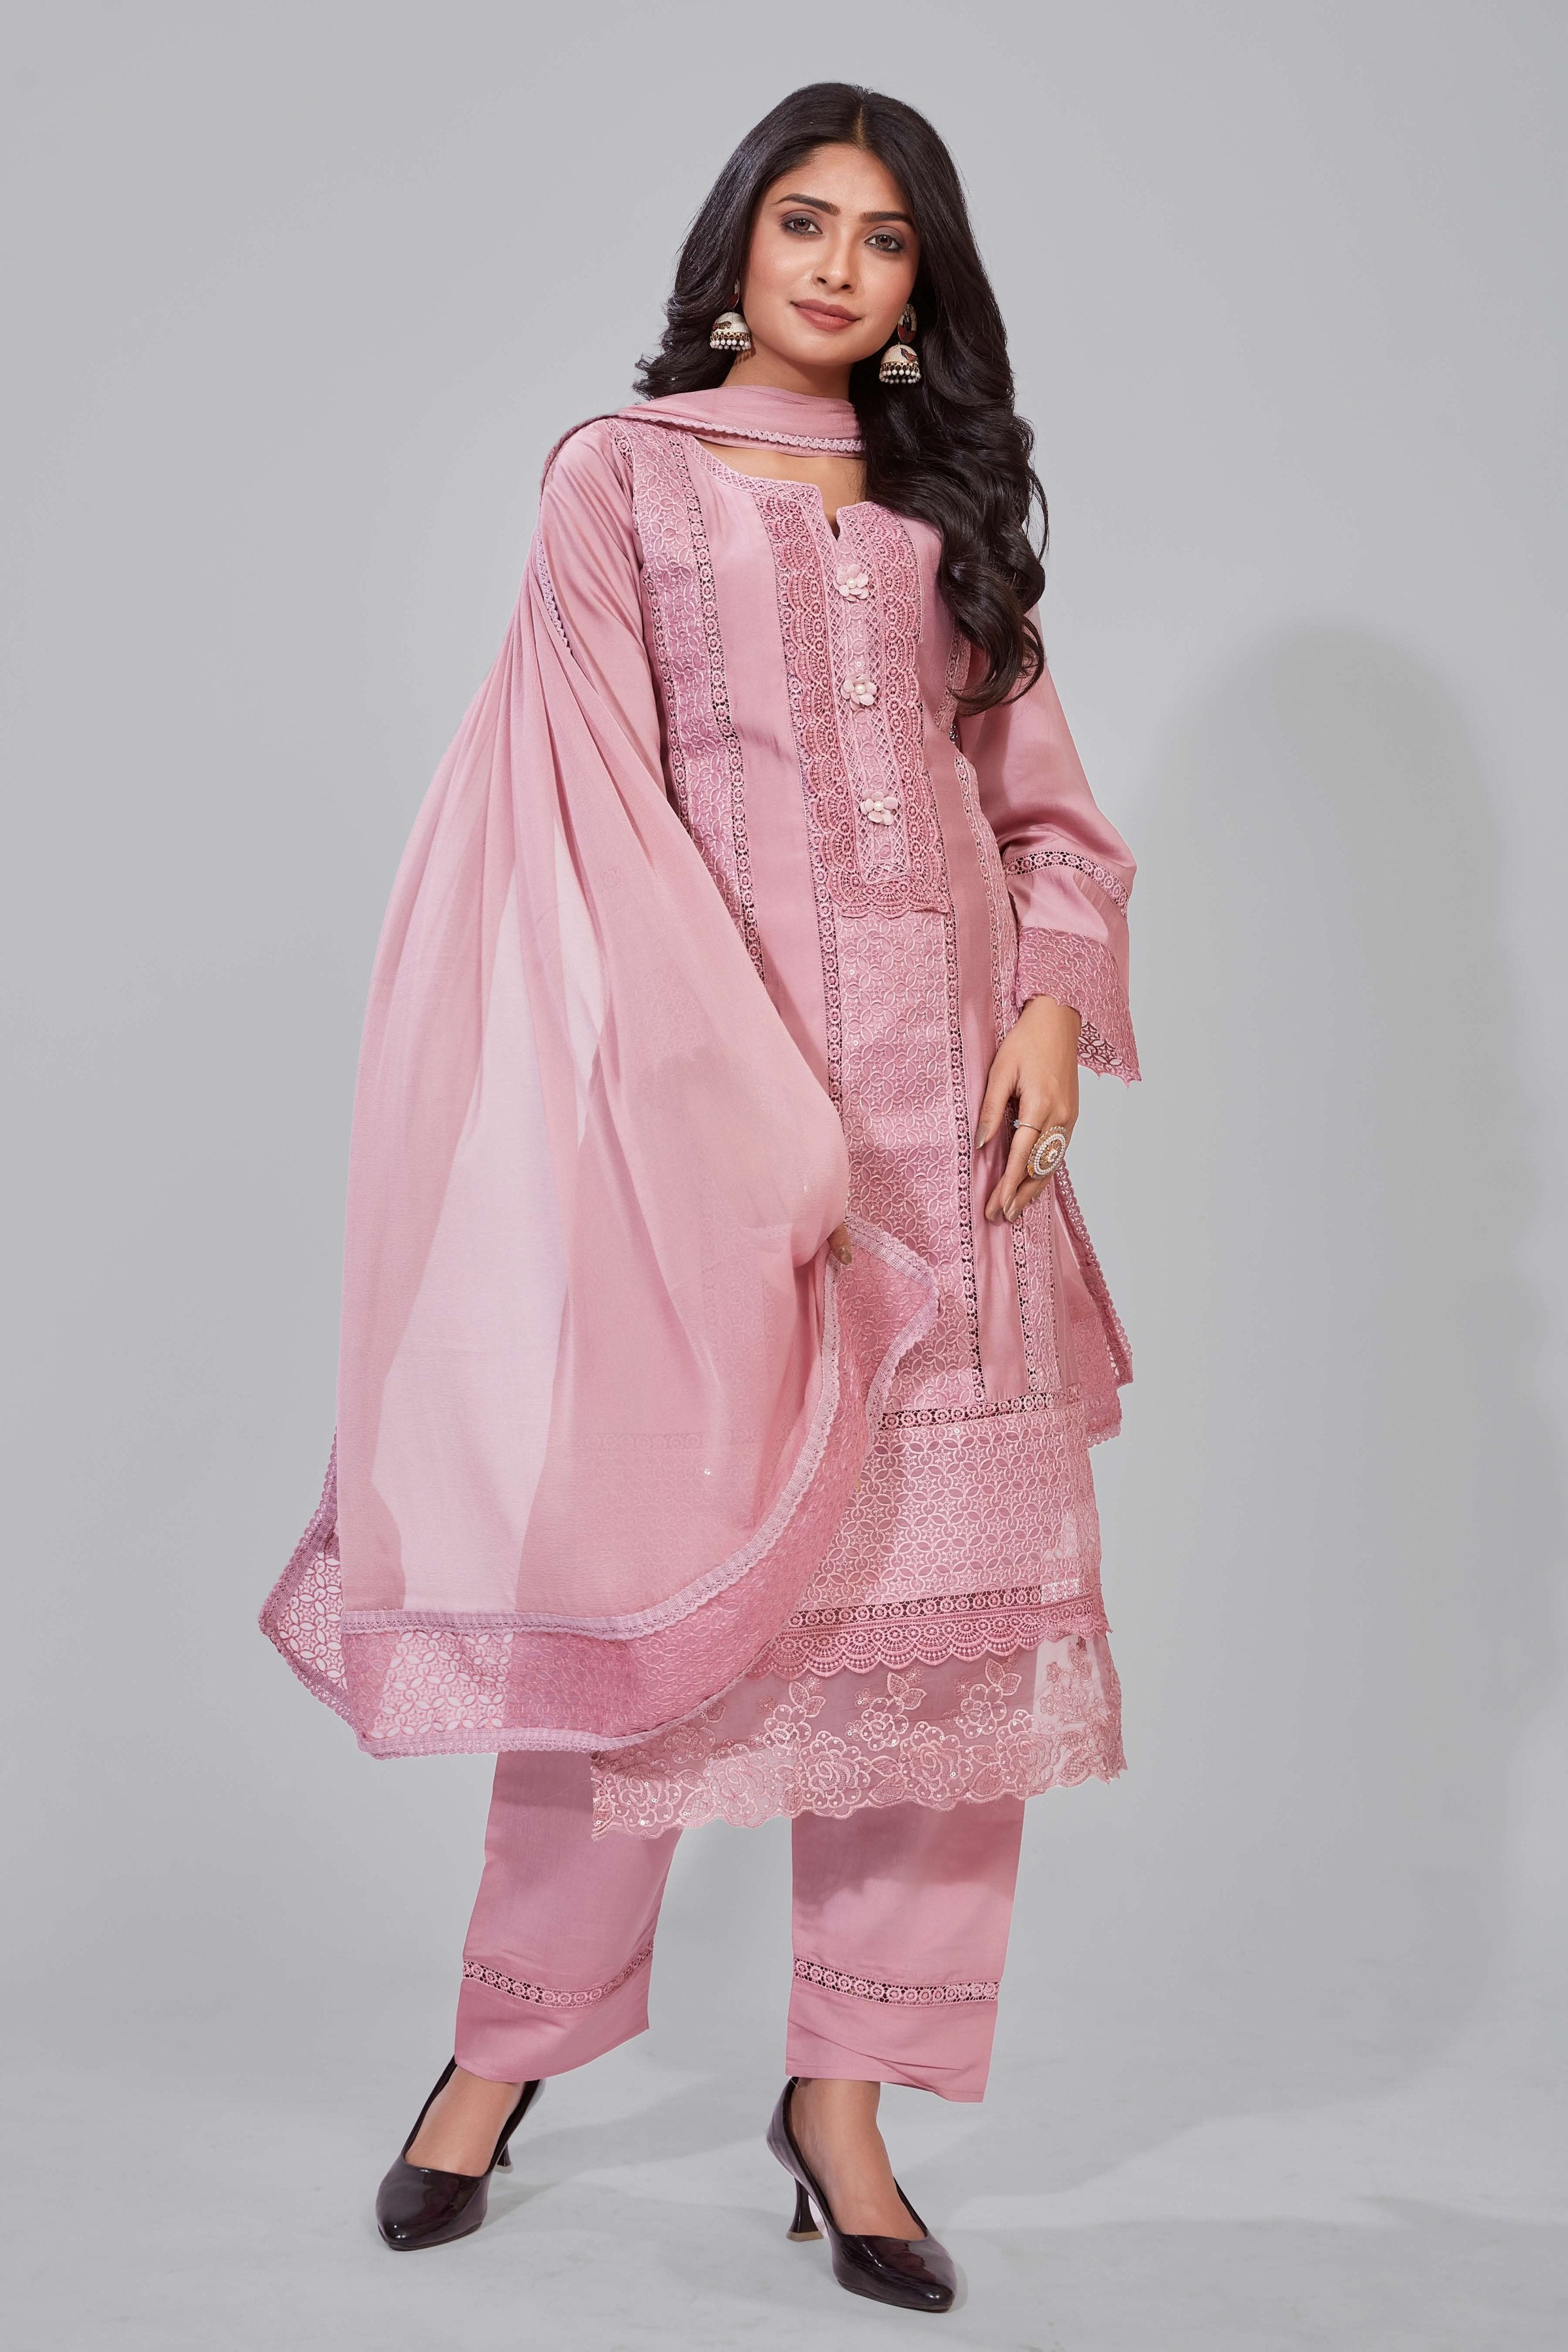 Varushi's featuring intricate Sifliwork and delicate lace Pakistanin Suit